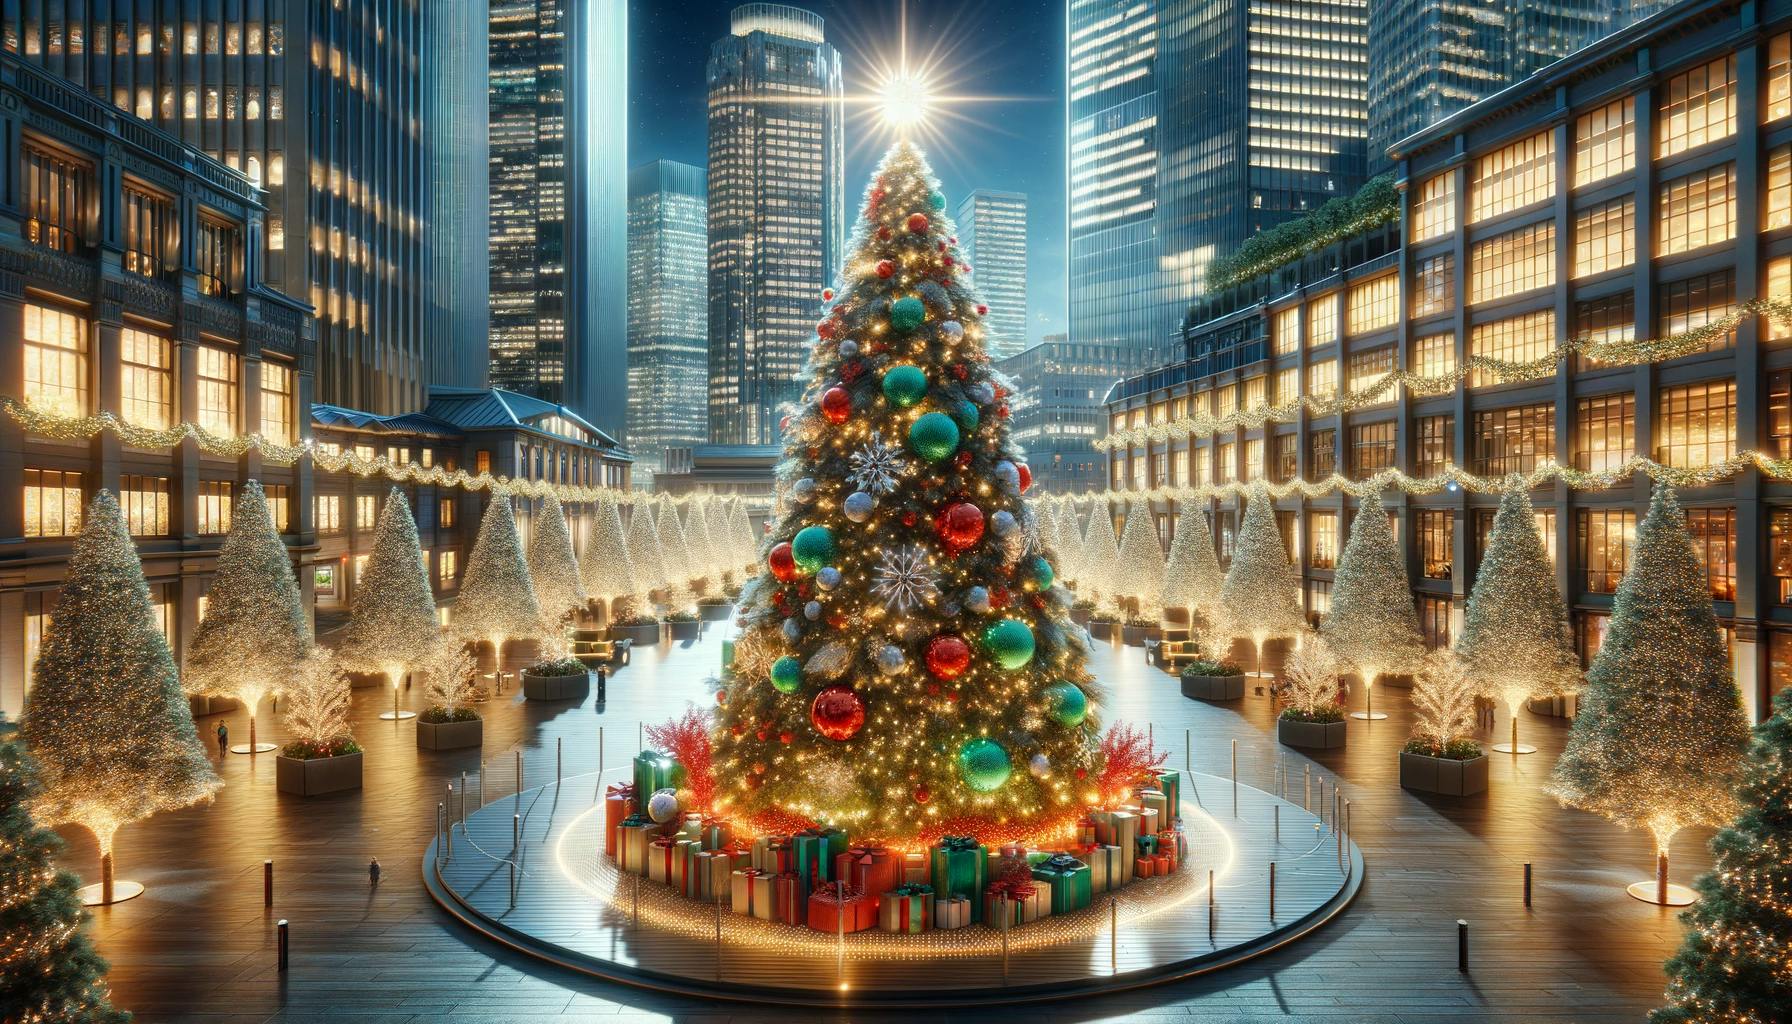 a Christmas tree with decorations in an urban setting. Enjoy the festive urban atmosphere!